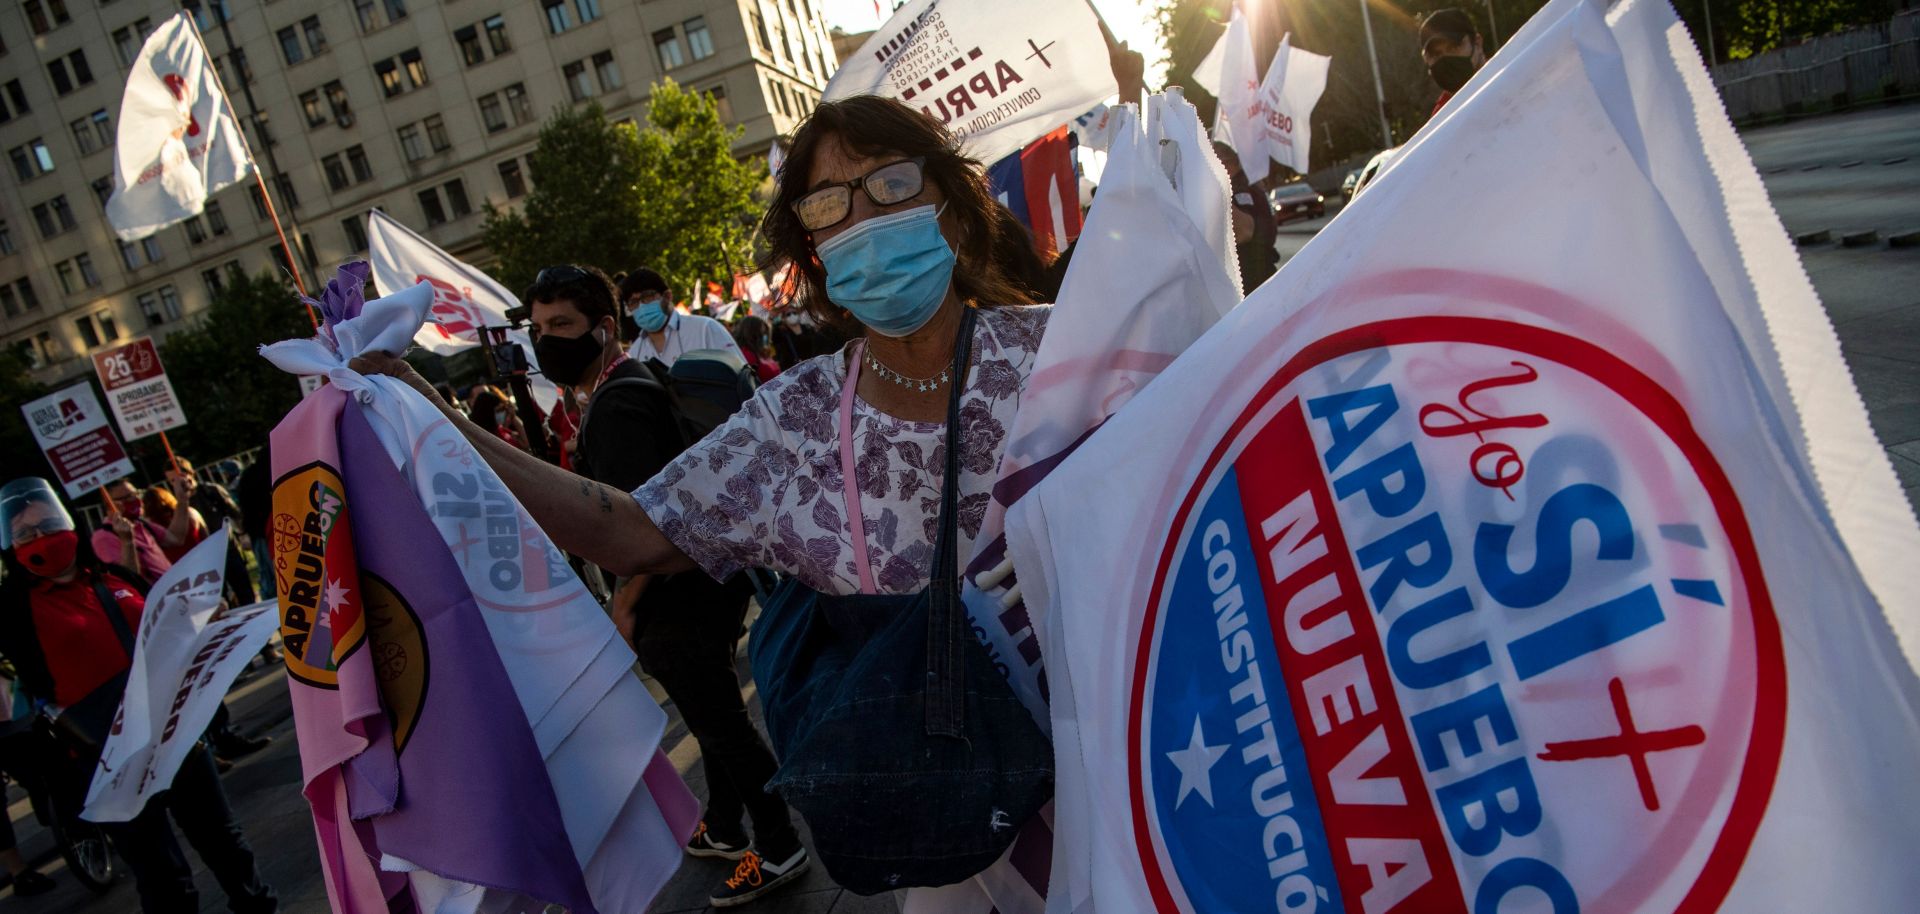 People take part in a rally in support of amending the Chilean constitution in Santiago, Chile, on Oct. 22, 2020.